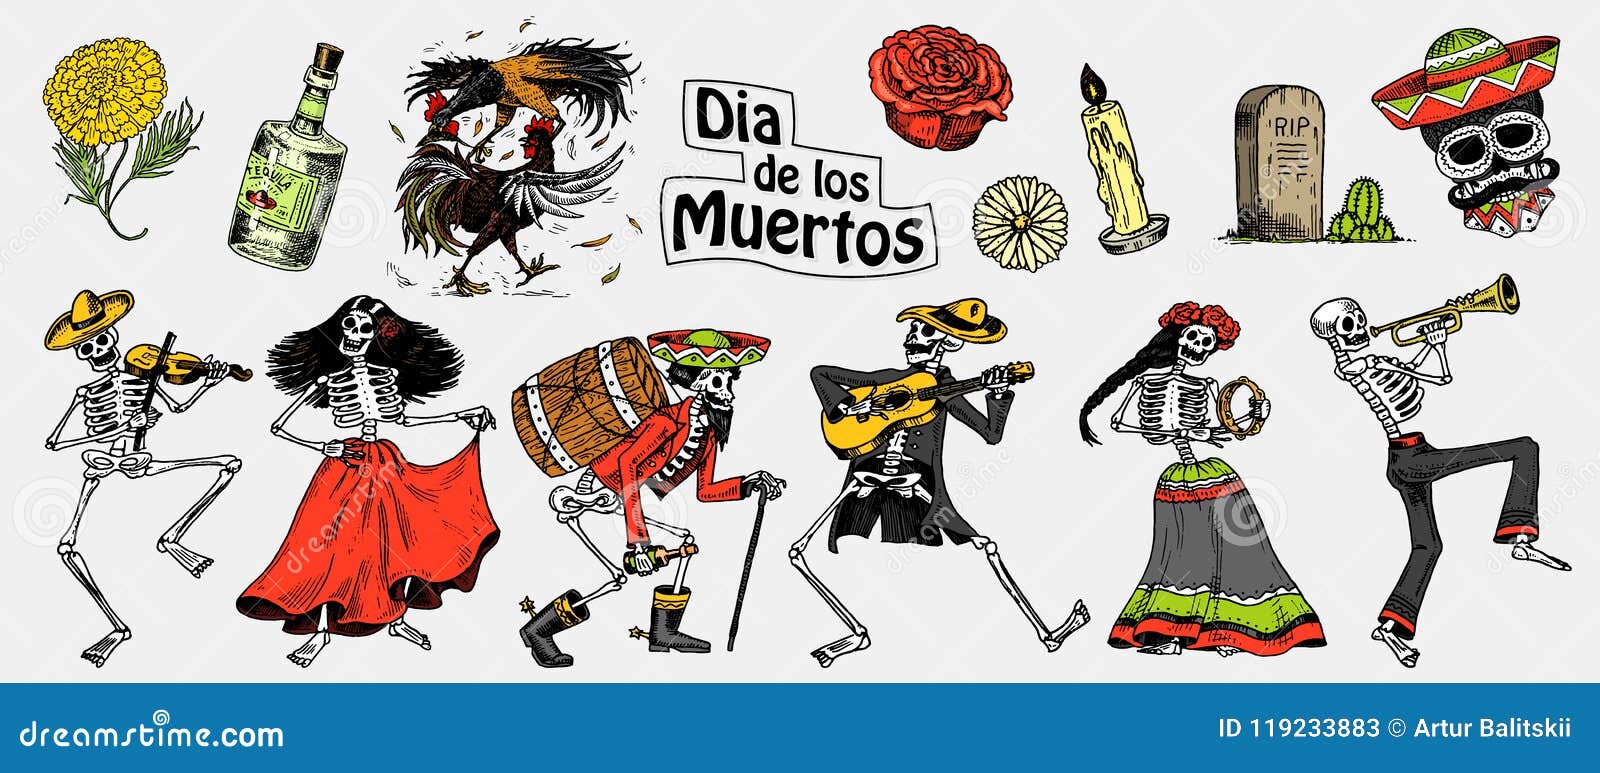 day of the dead. mexican national holiday. original inscription in spanish dia de los muertos. skeletons in costumes